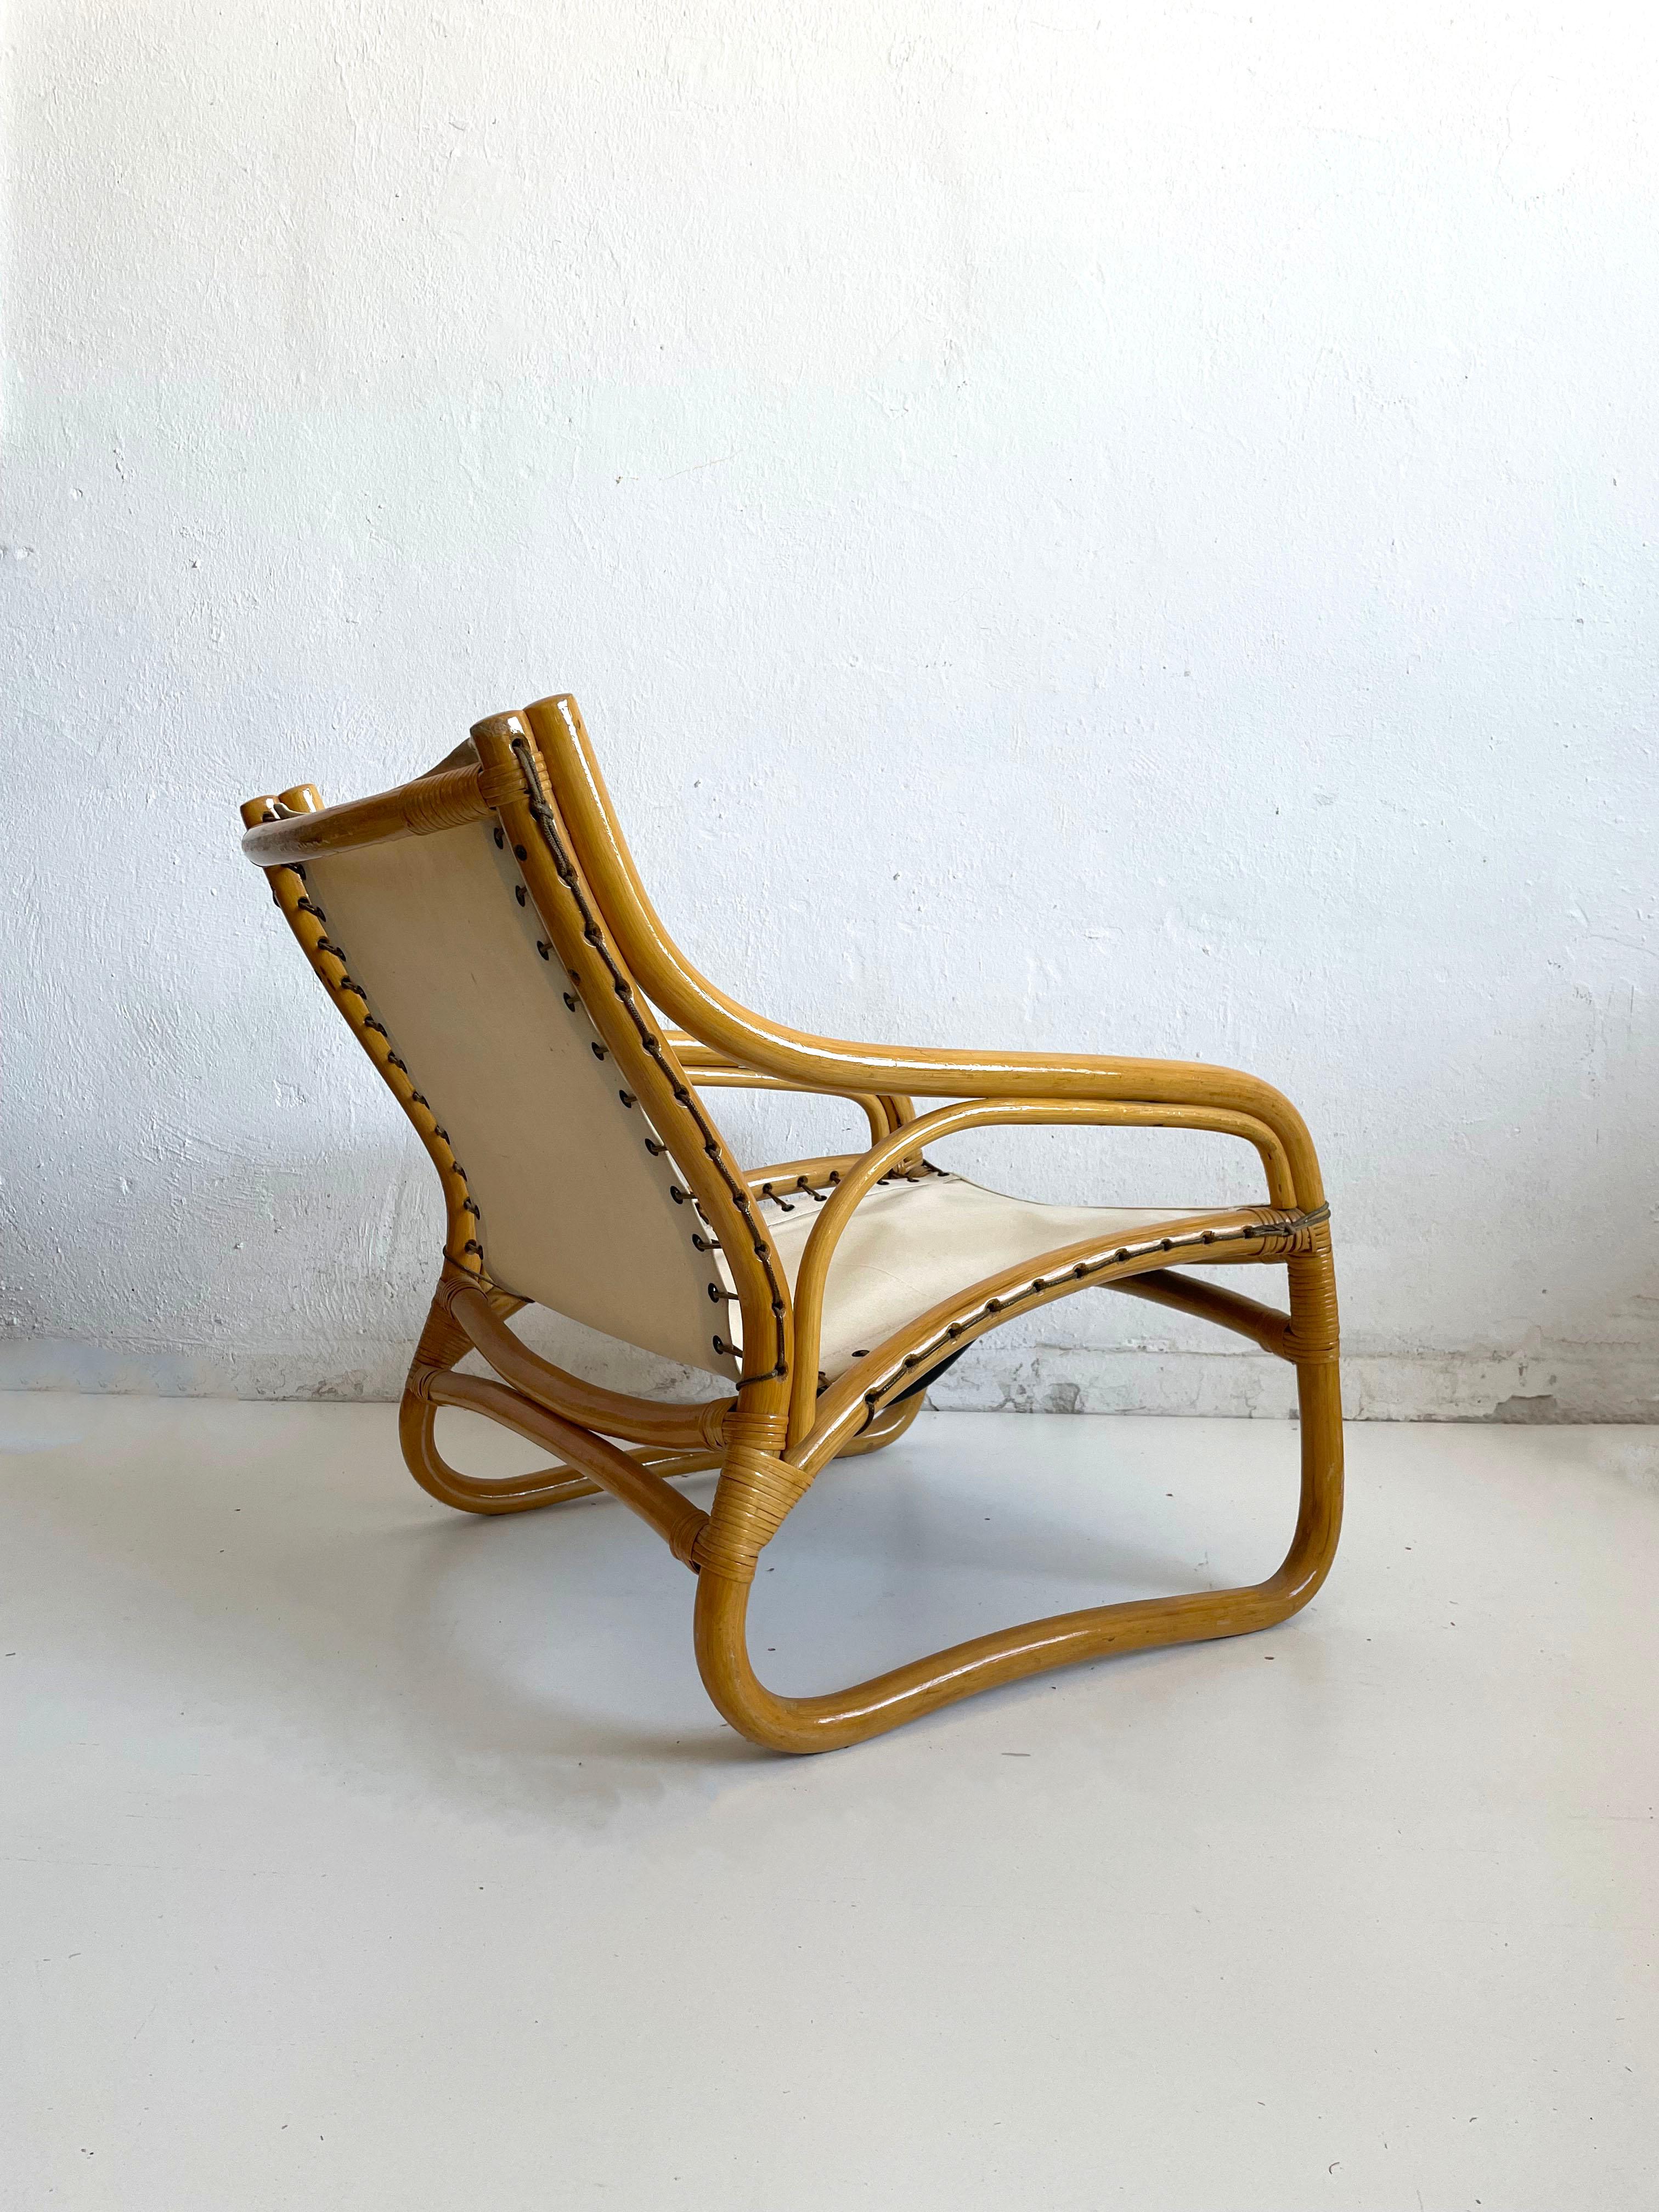 Vintage armchair from the 1970s. 

Produced in Scandinavia by an unknown manufacturer. The quality of the production is very high.

The chair features a bamboo frame with durable fabric strapping and a high-quality light blue (turquoise) colored